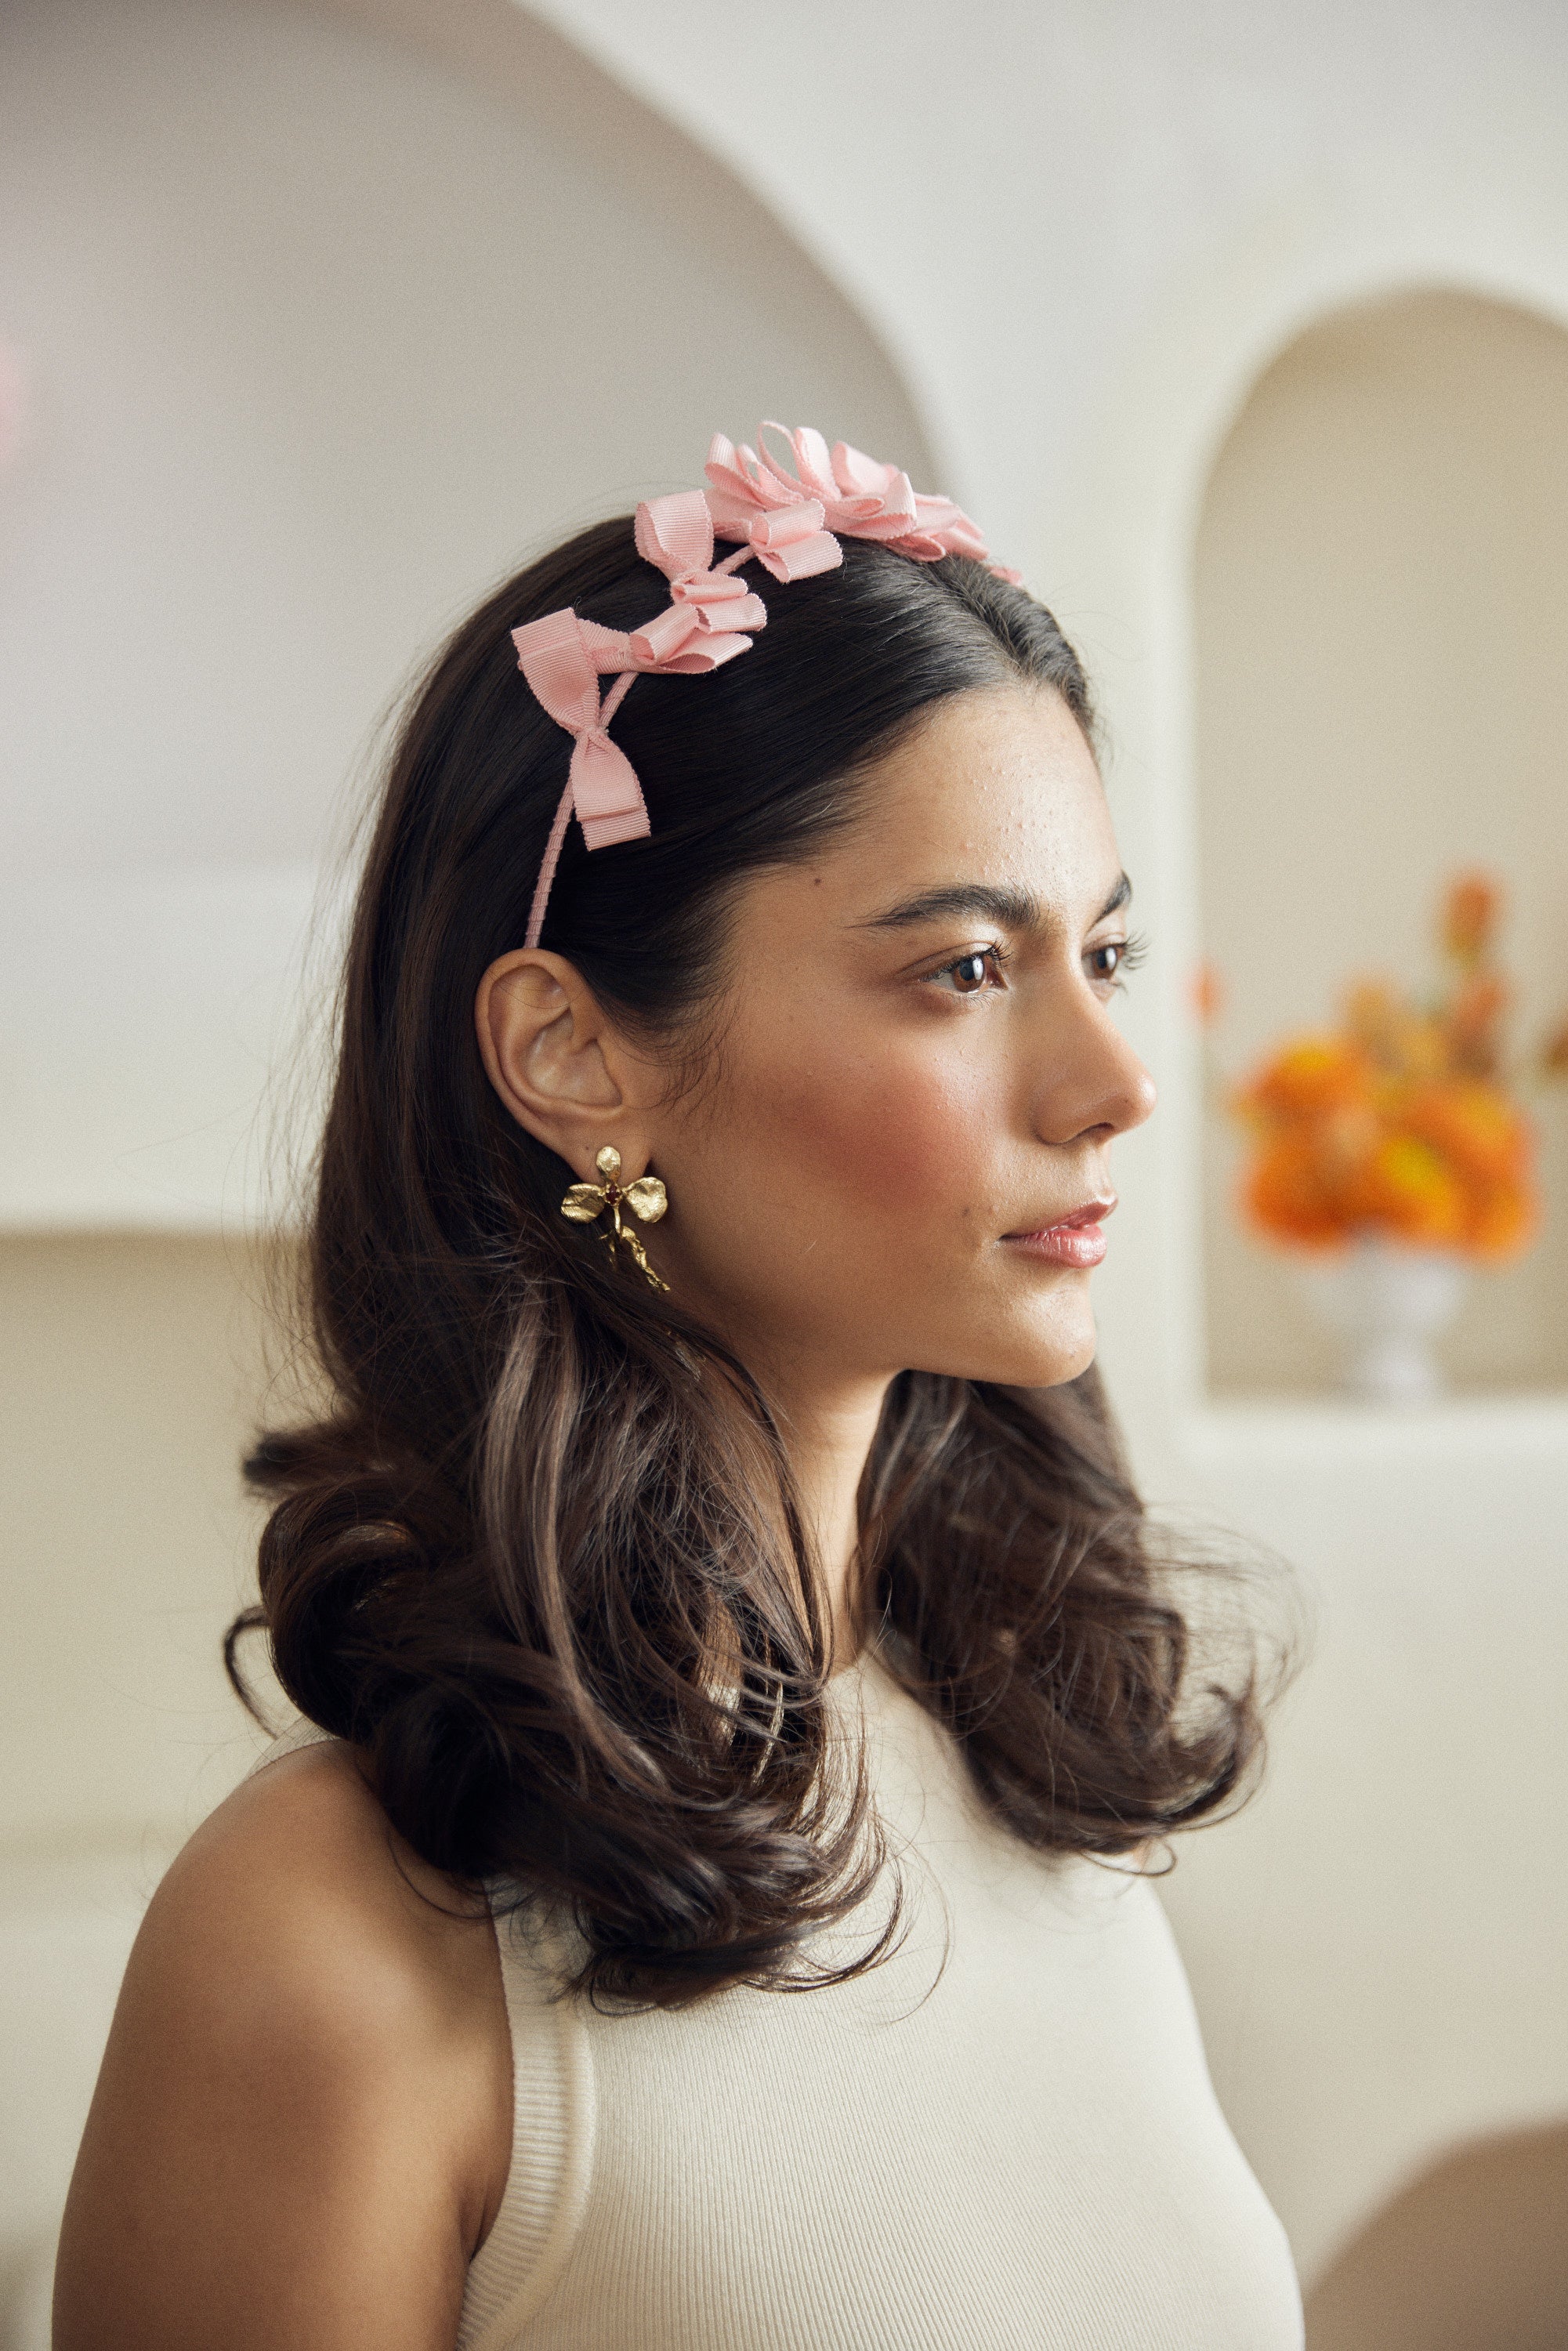 Forget me not bow headband - Peony pink